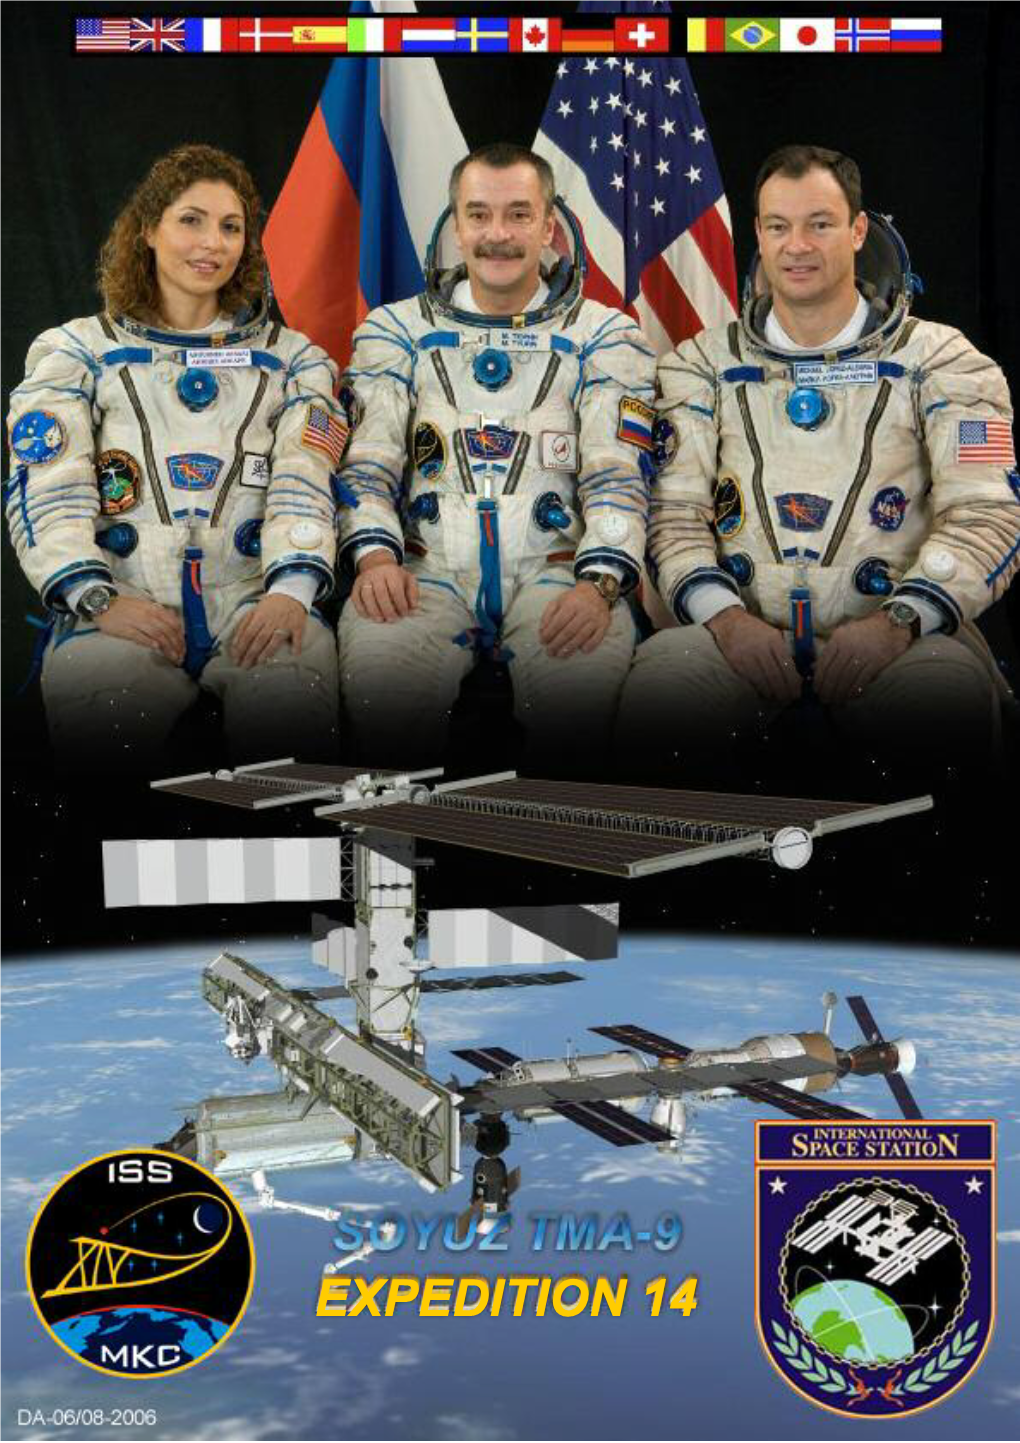 Expedition 14 Soyuz Tma-9 – Expedition 14